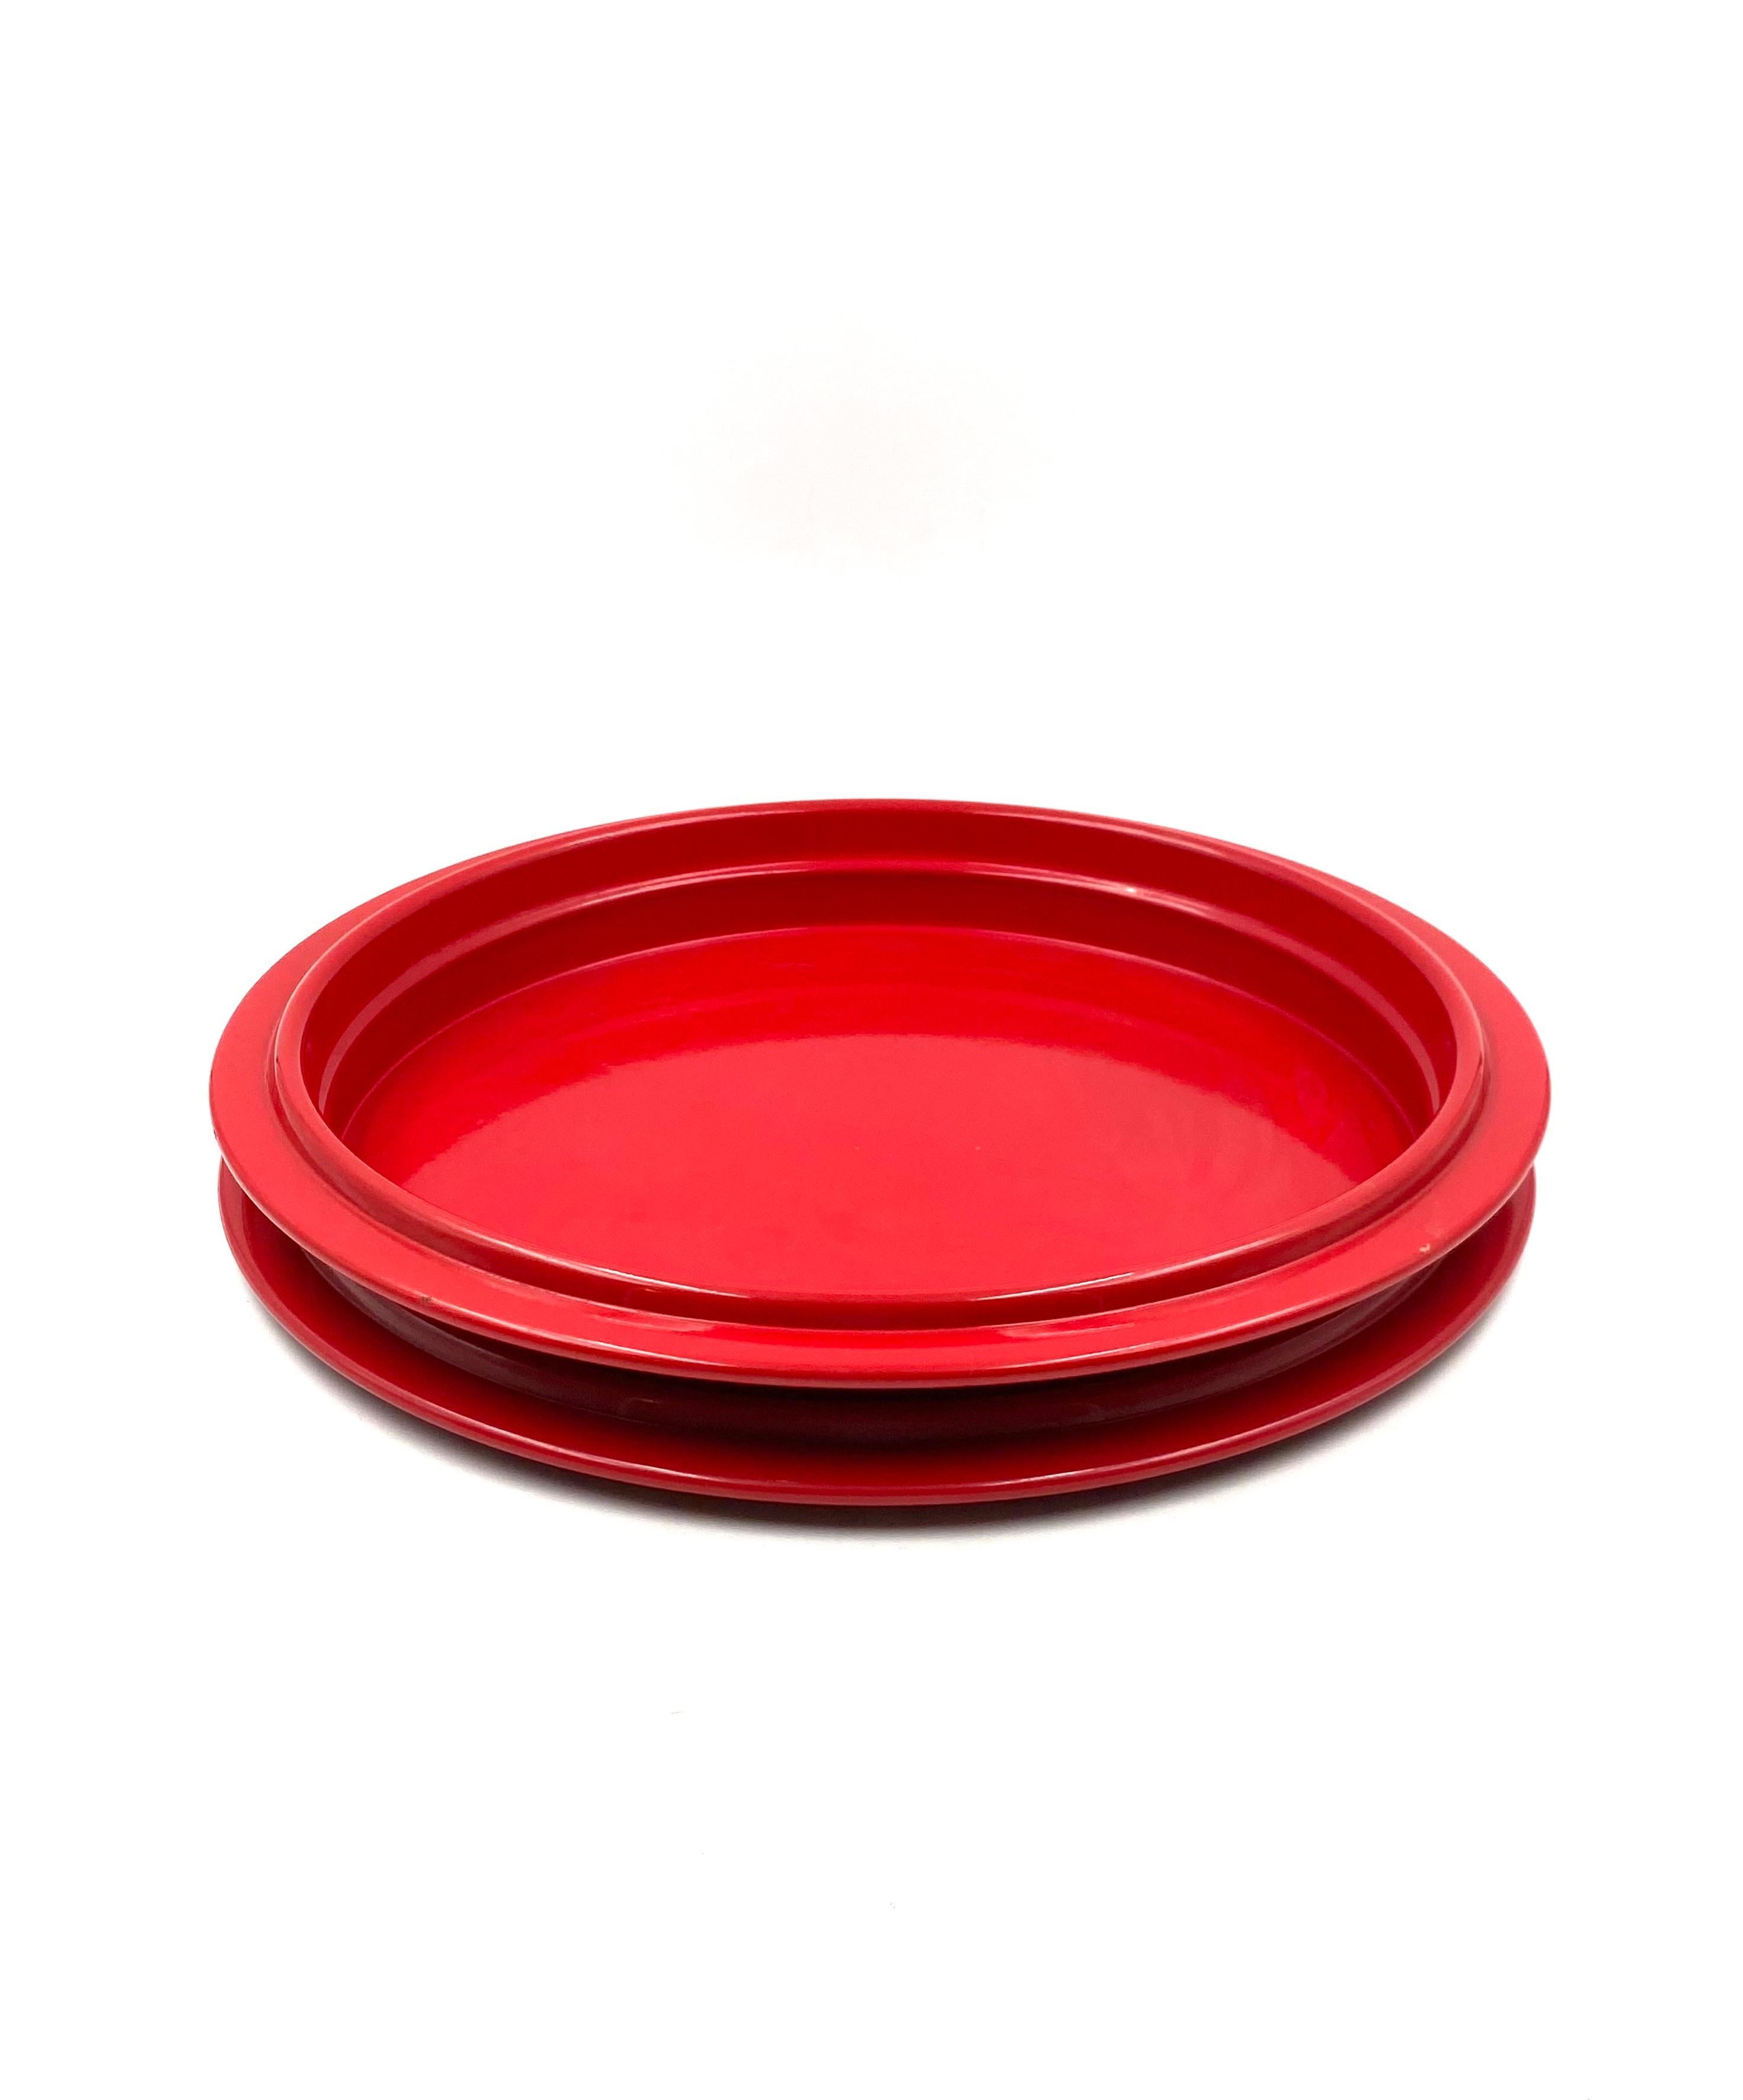 Late 20th Century Gianfranco Frattini, Red Centerpiece / Tray, Progetti Italy, 1970s For Sale